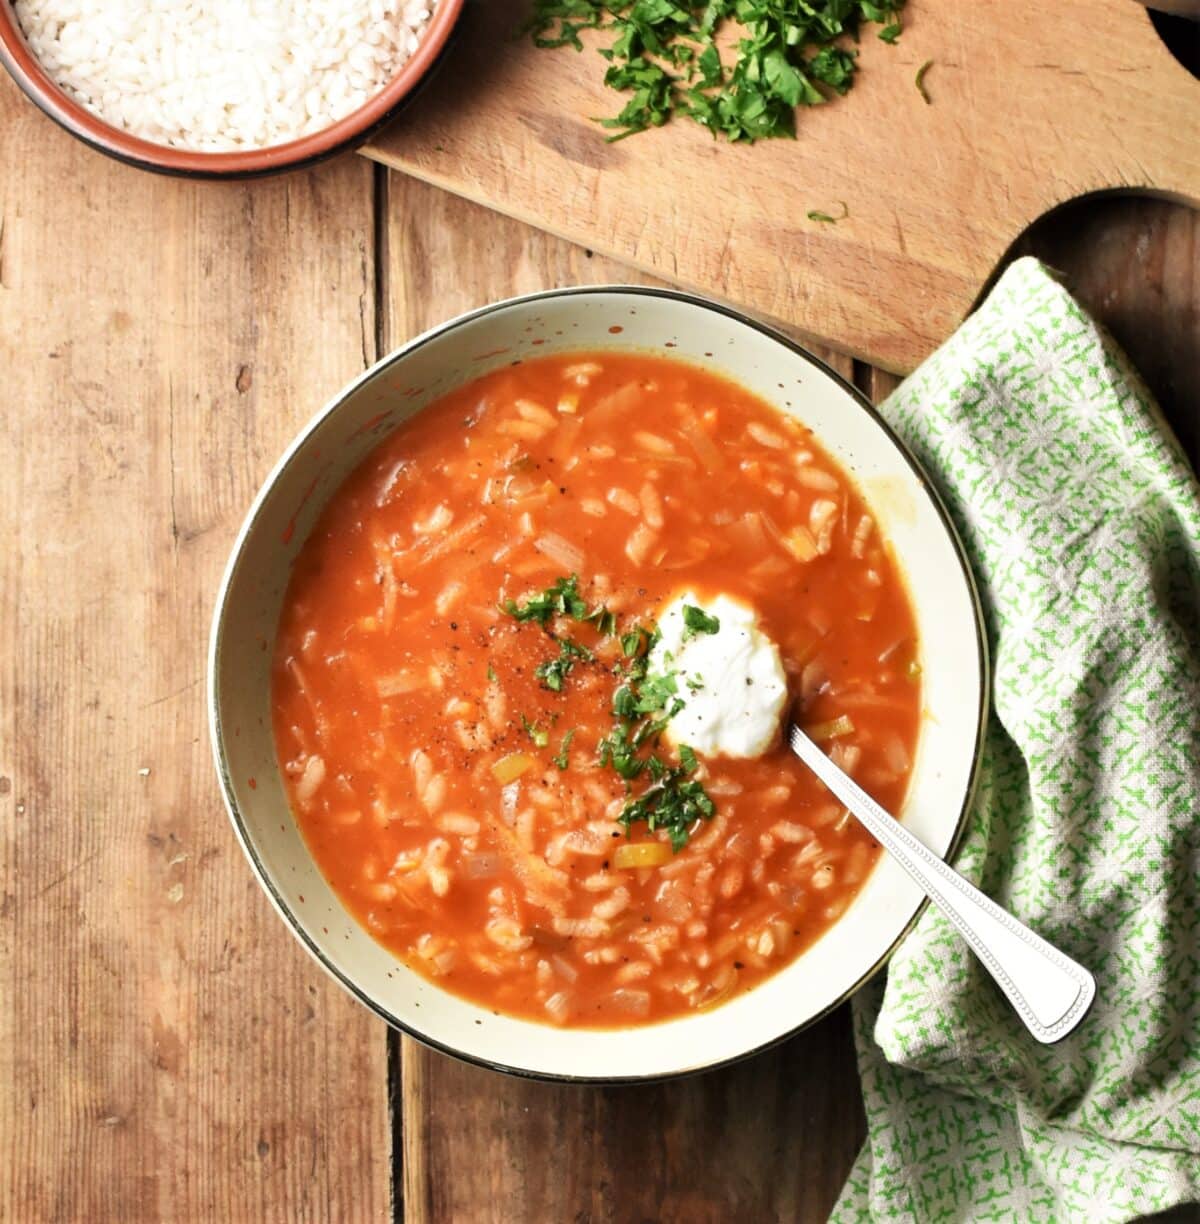 Tomato rice soup with yogurt and herbs in green bowl with spoon, green cloth the the right and rice in dish on top of wooden board with chopped herbs in background.